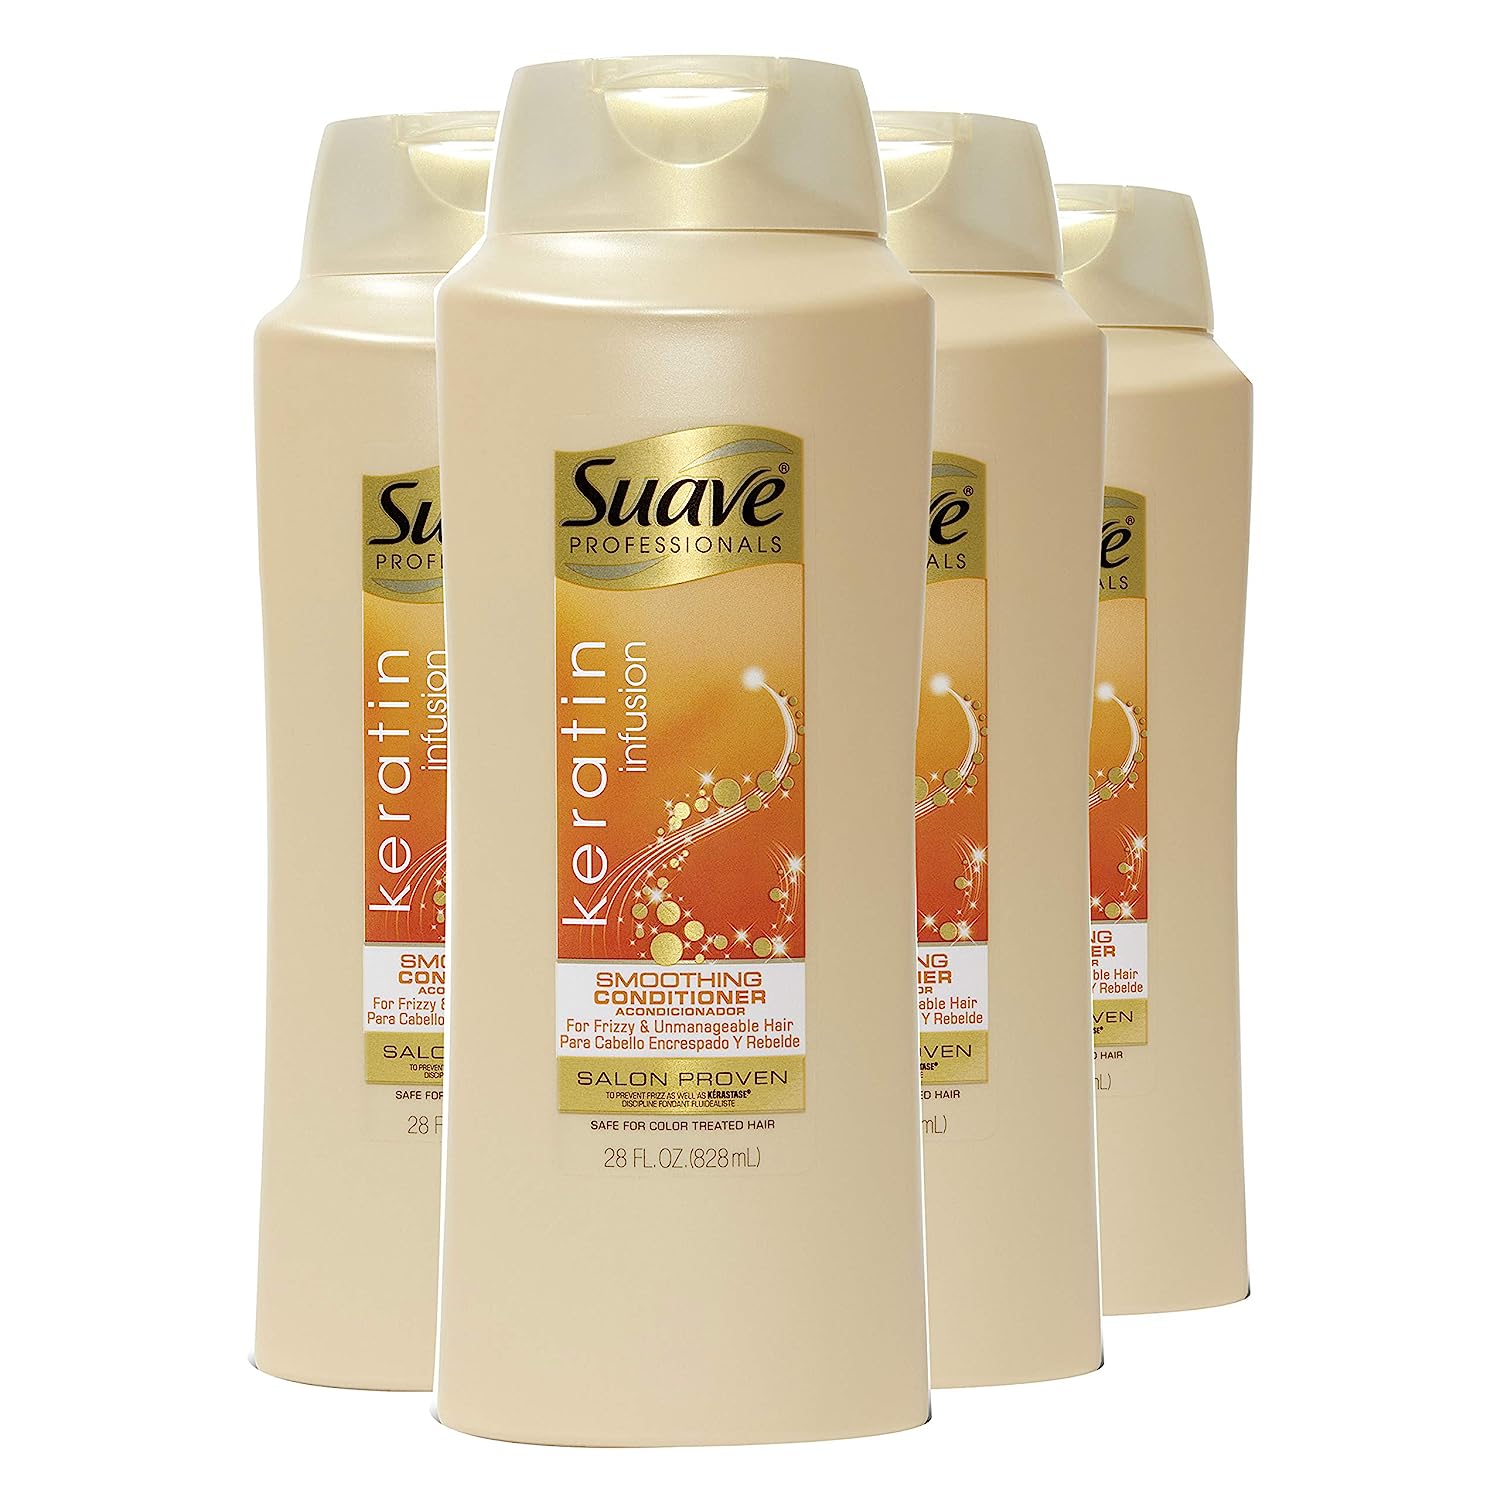 Suave Professionals Smoothing Shampoo (2 count) and [...]